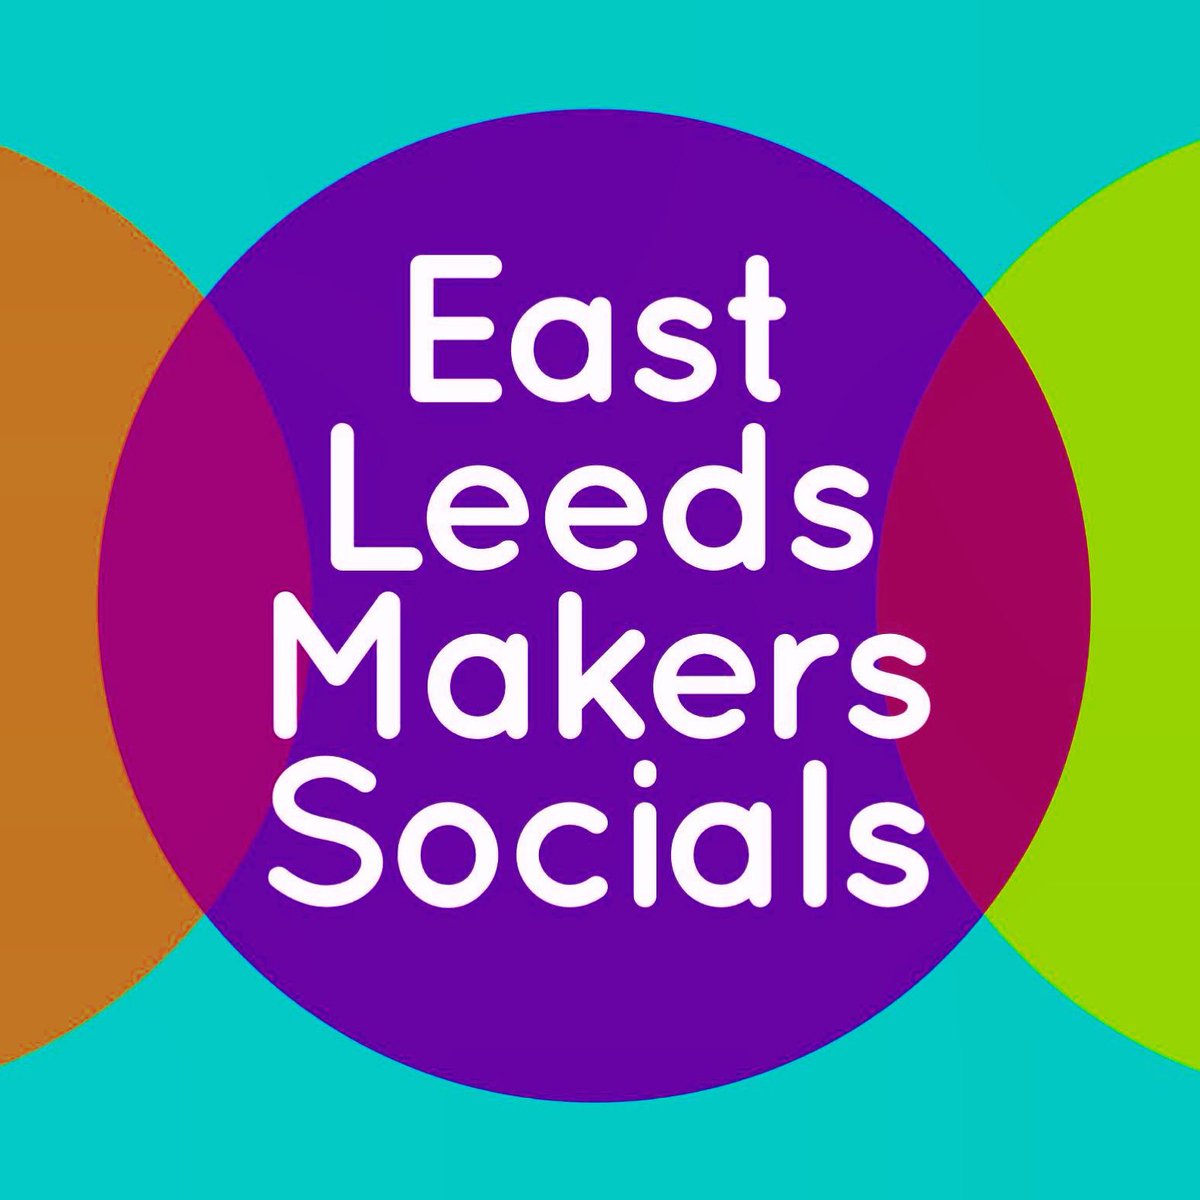 We’re bringing back our #EastLeedsMakers socials! Open to all artists and makers in #EastLeeds and beyond - come along to meet other creatives and arts professionals, and tell us what you need to develop your practice.